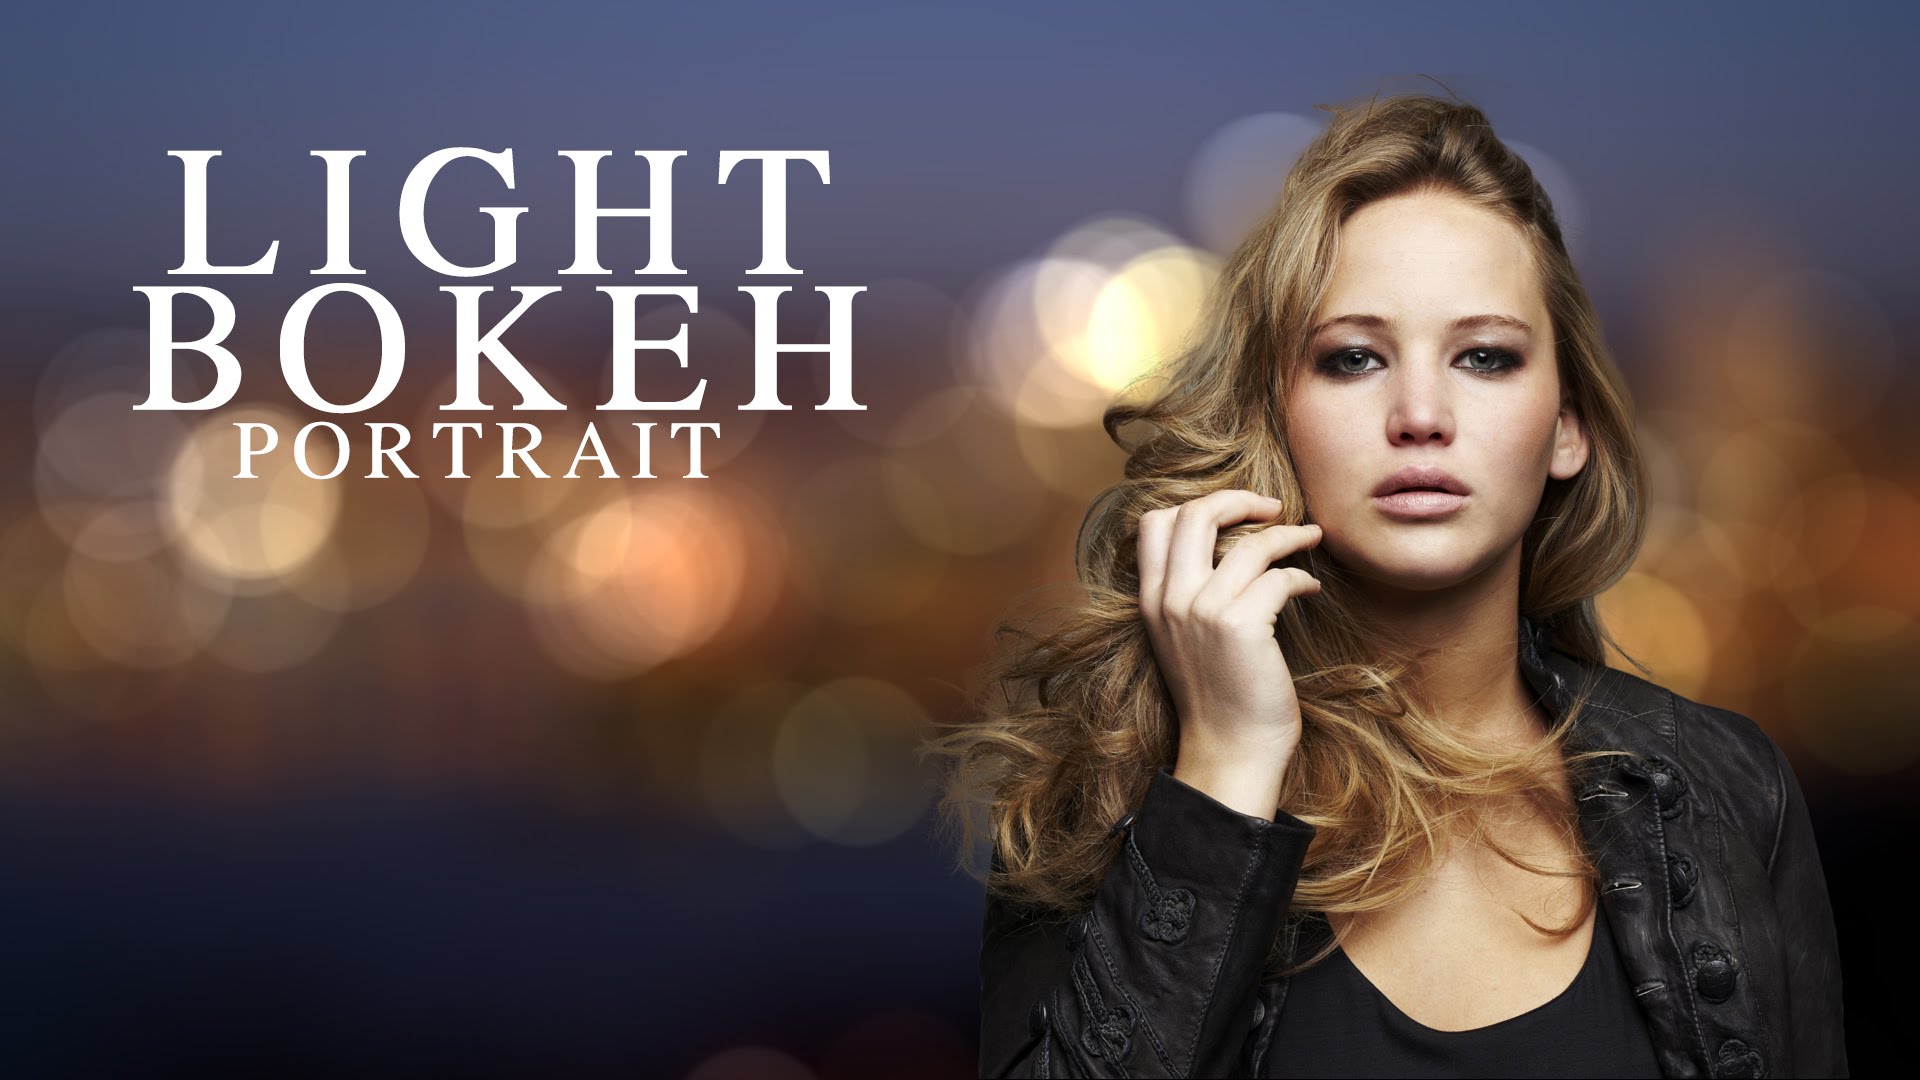 How to Create Light Bokeh Portrait in Photoshop Tutorial